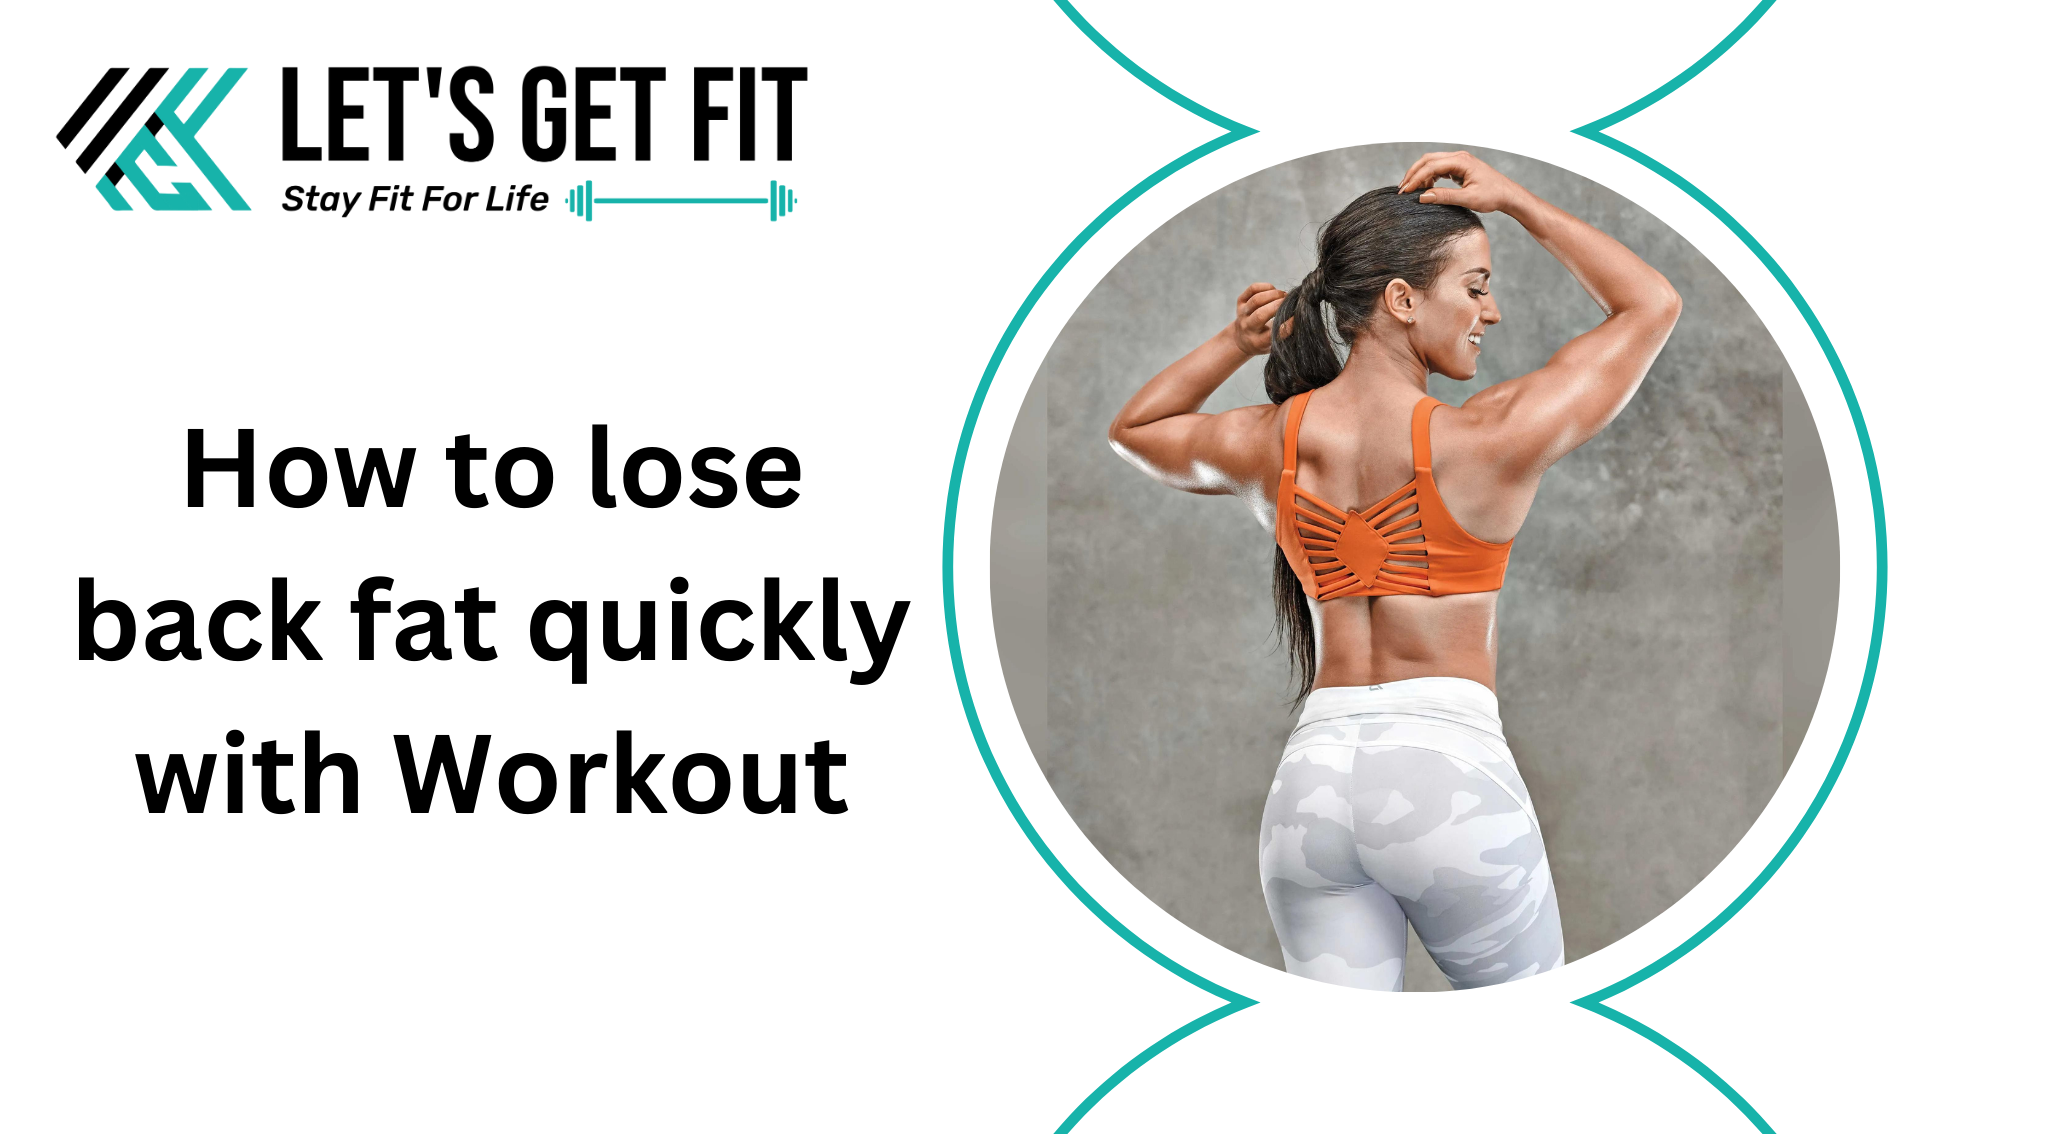 How to lose back fat quickly with Workout